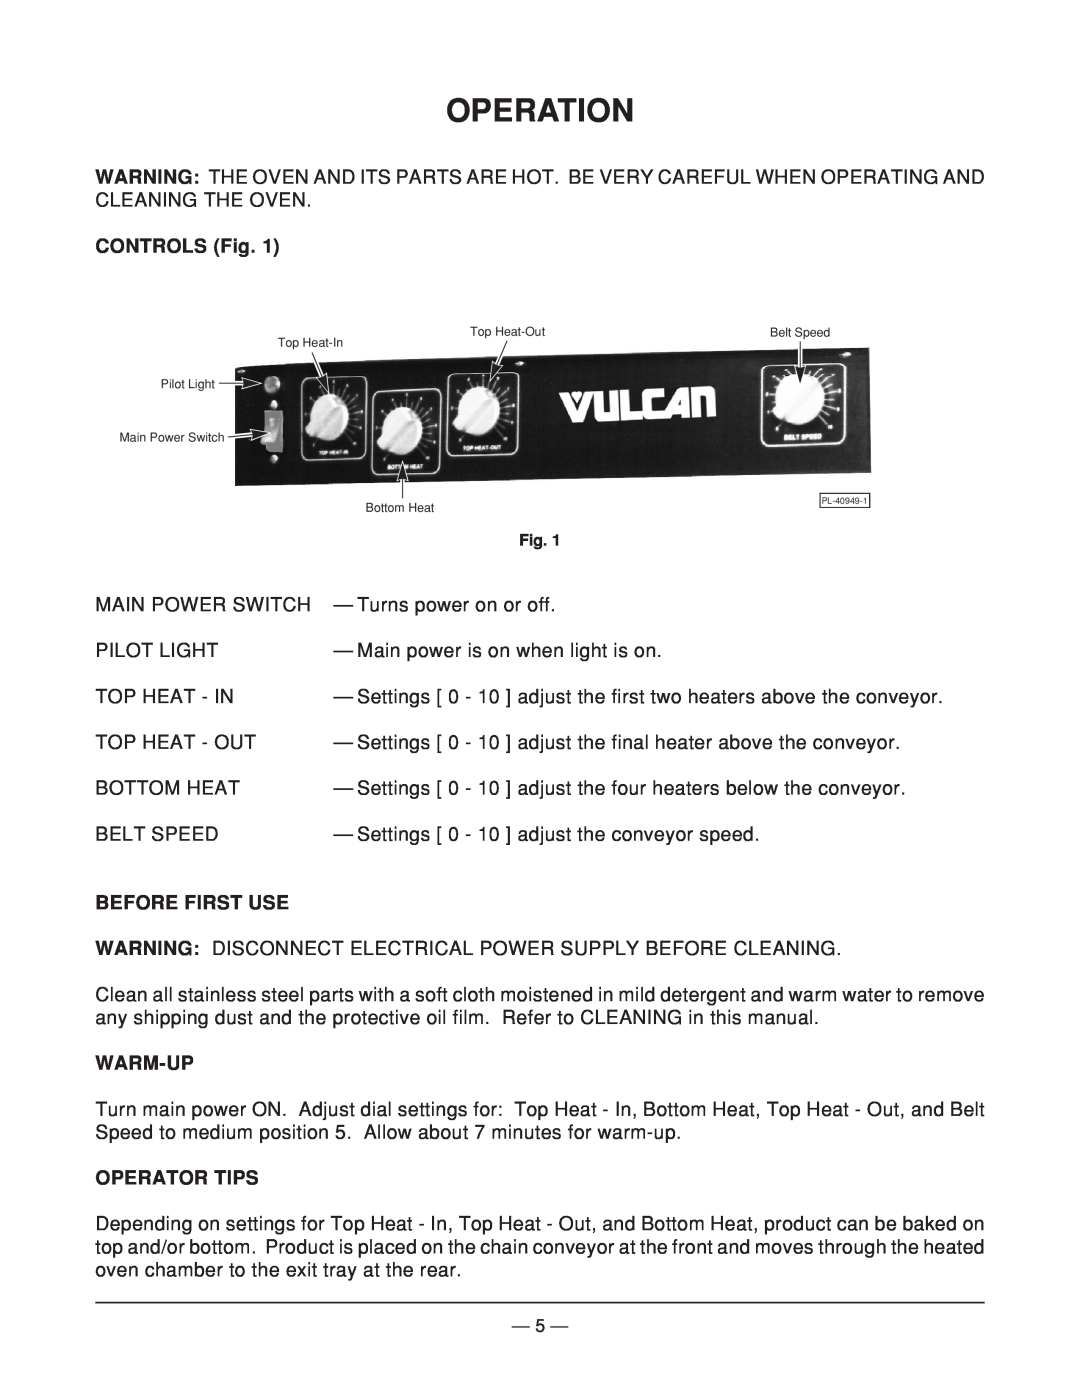 Vulcan-Hart CB1824E, ML-52497 operation manual Operation, CONTROLS Fig, Before First Use, Warm-Up, Operator Tips 